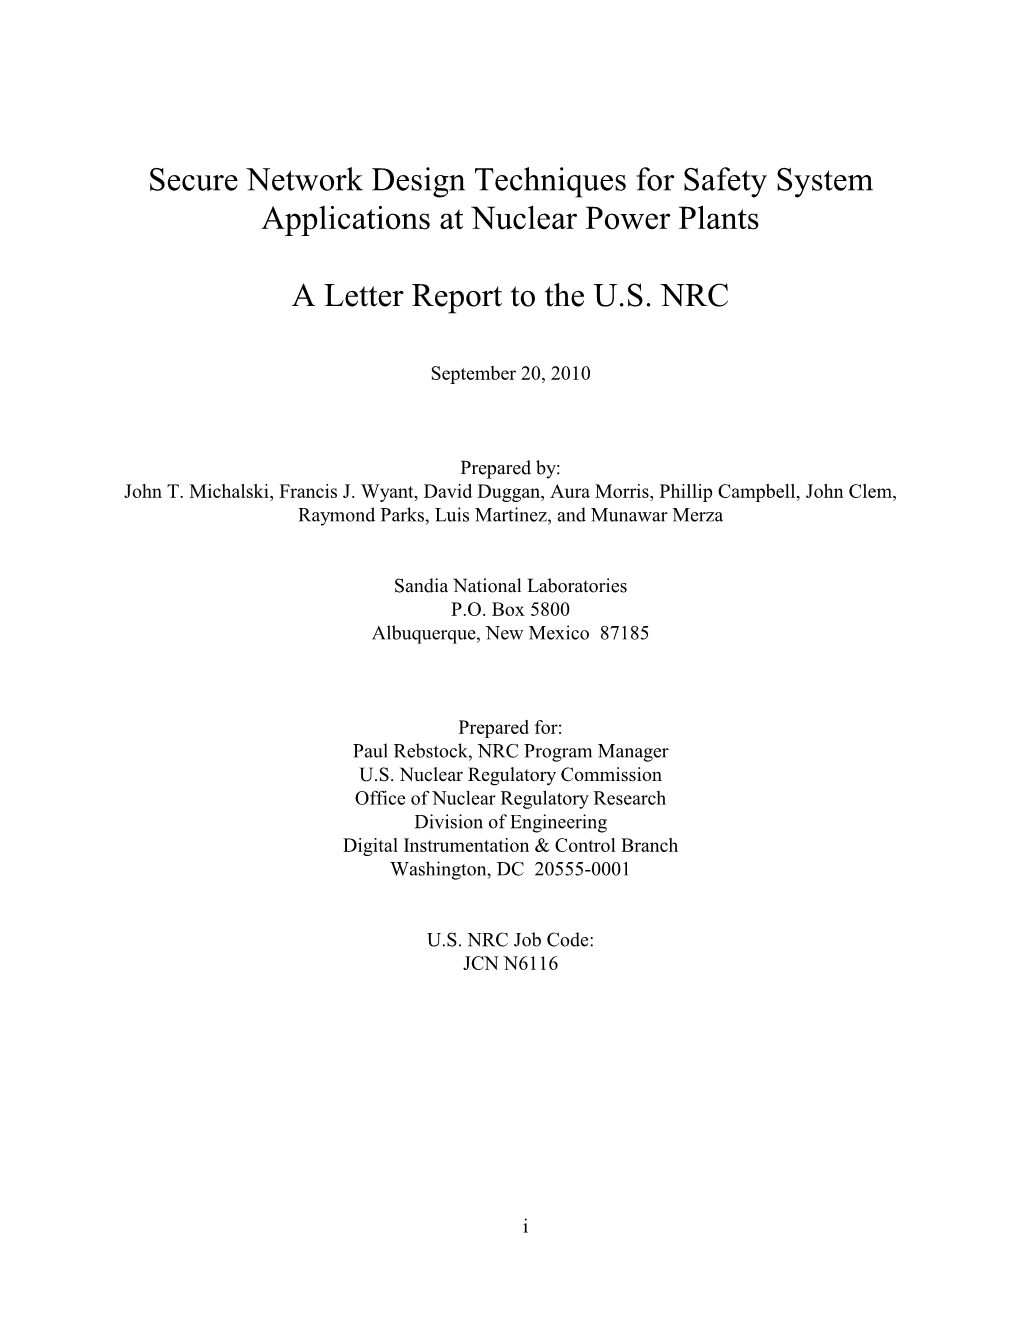 Secure Network Design Techniques for Safety System Applications at Nuclear Power Plants